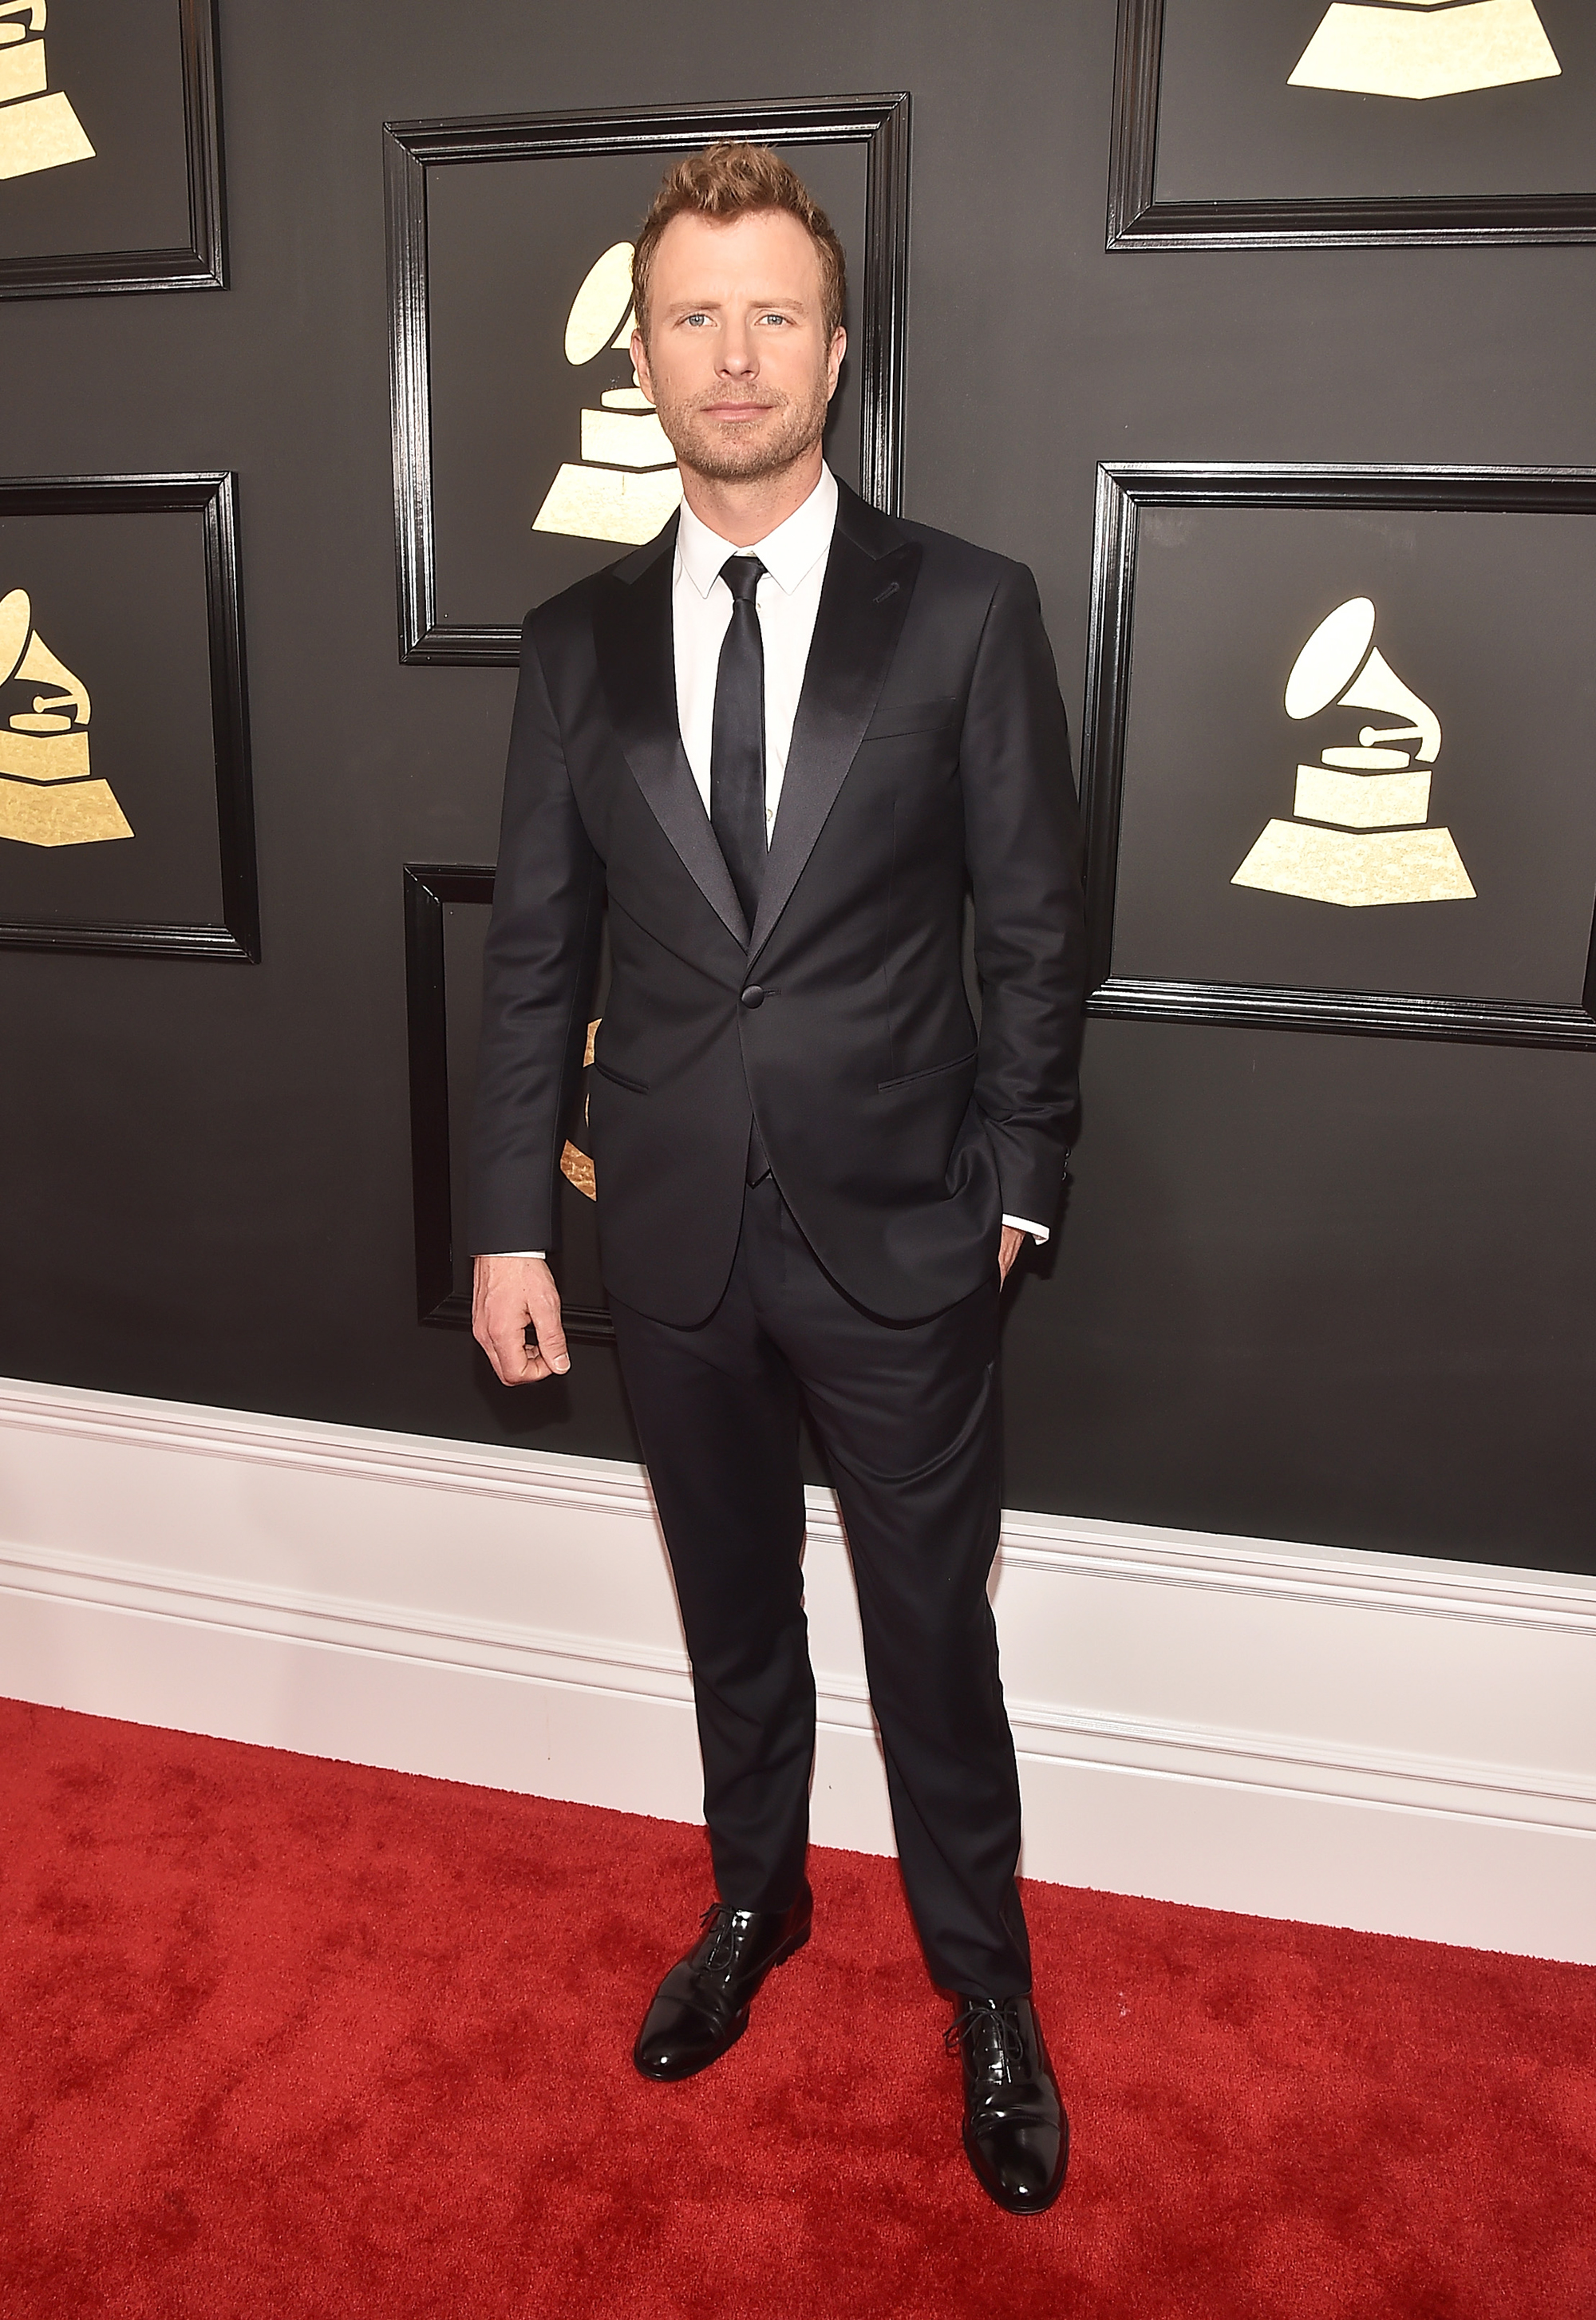 Dierks Bentley attends the 59th GRAMMY Awards at STAPLES Center, on Feb. 12, 2017 in Los Angeles.